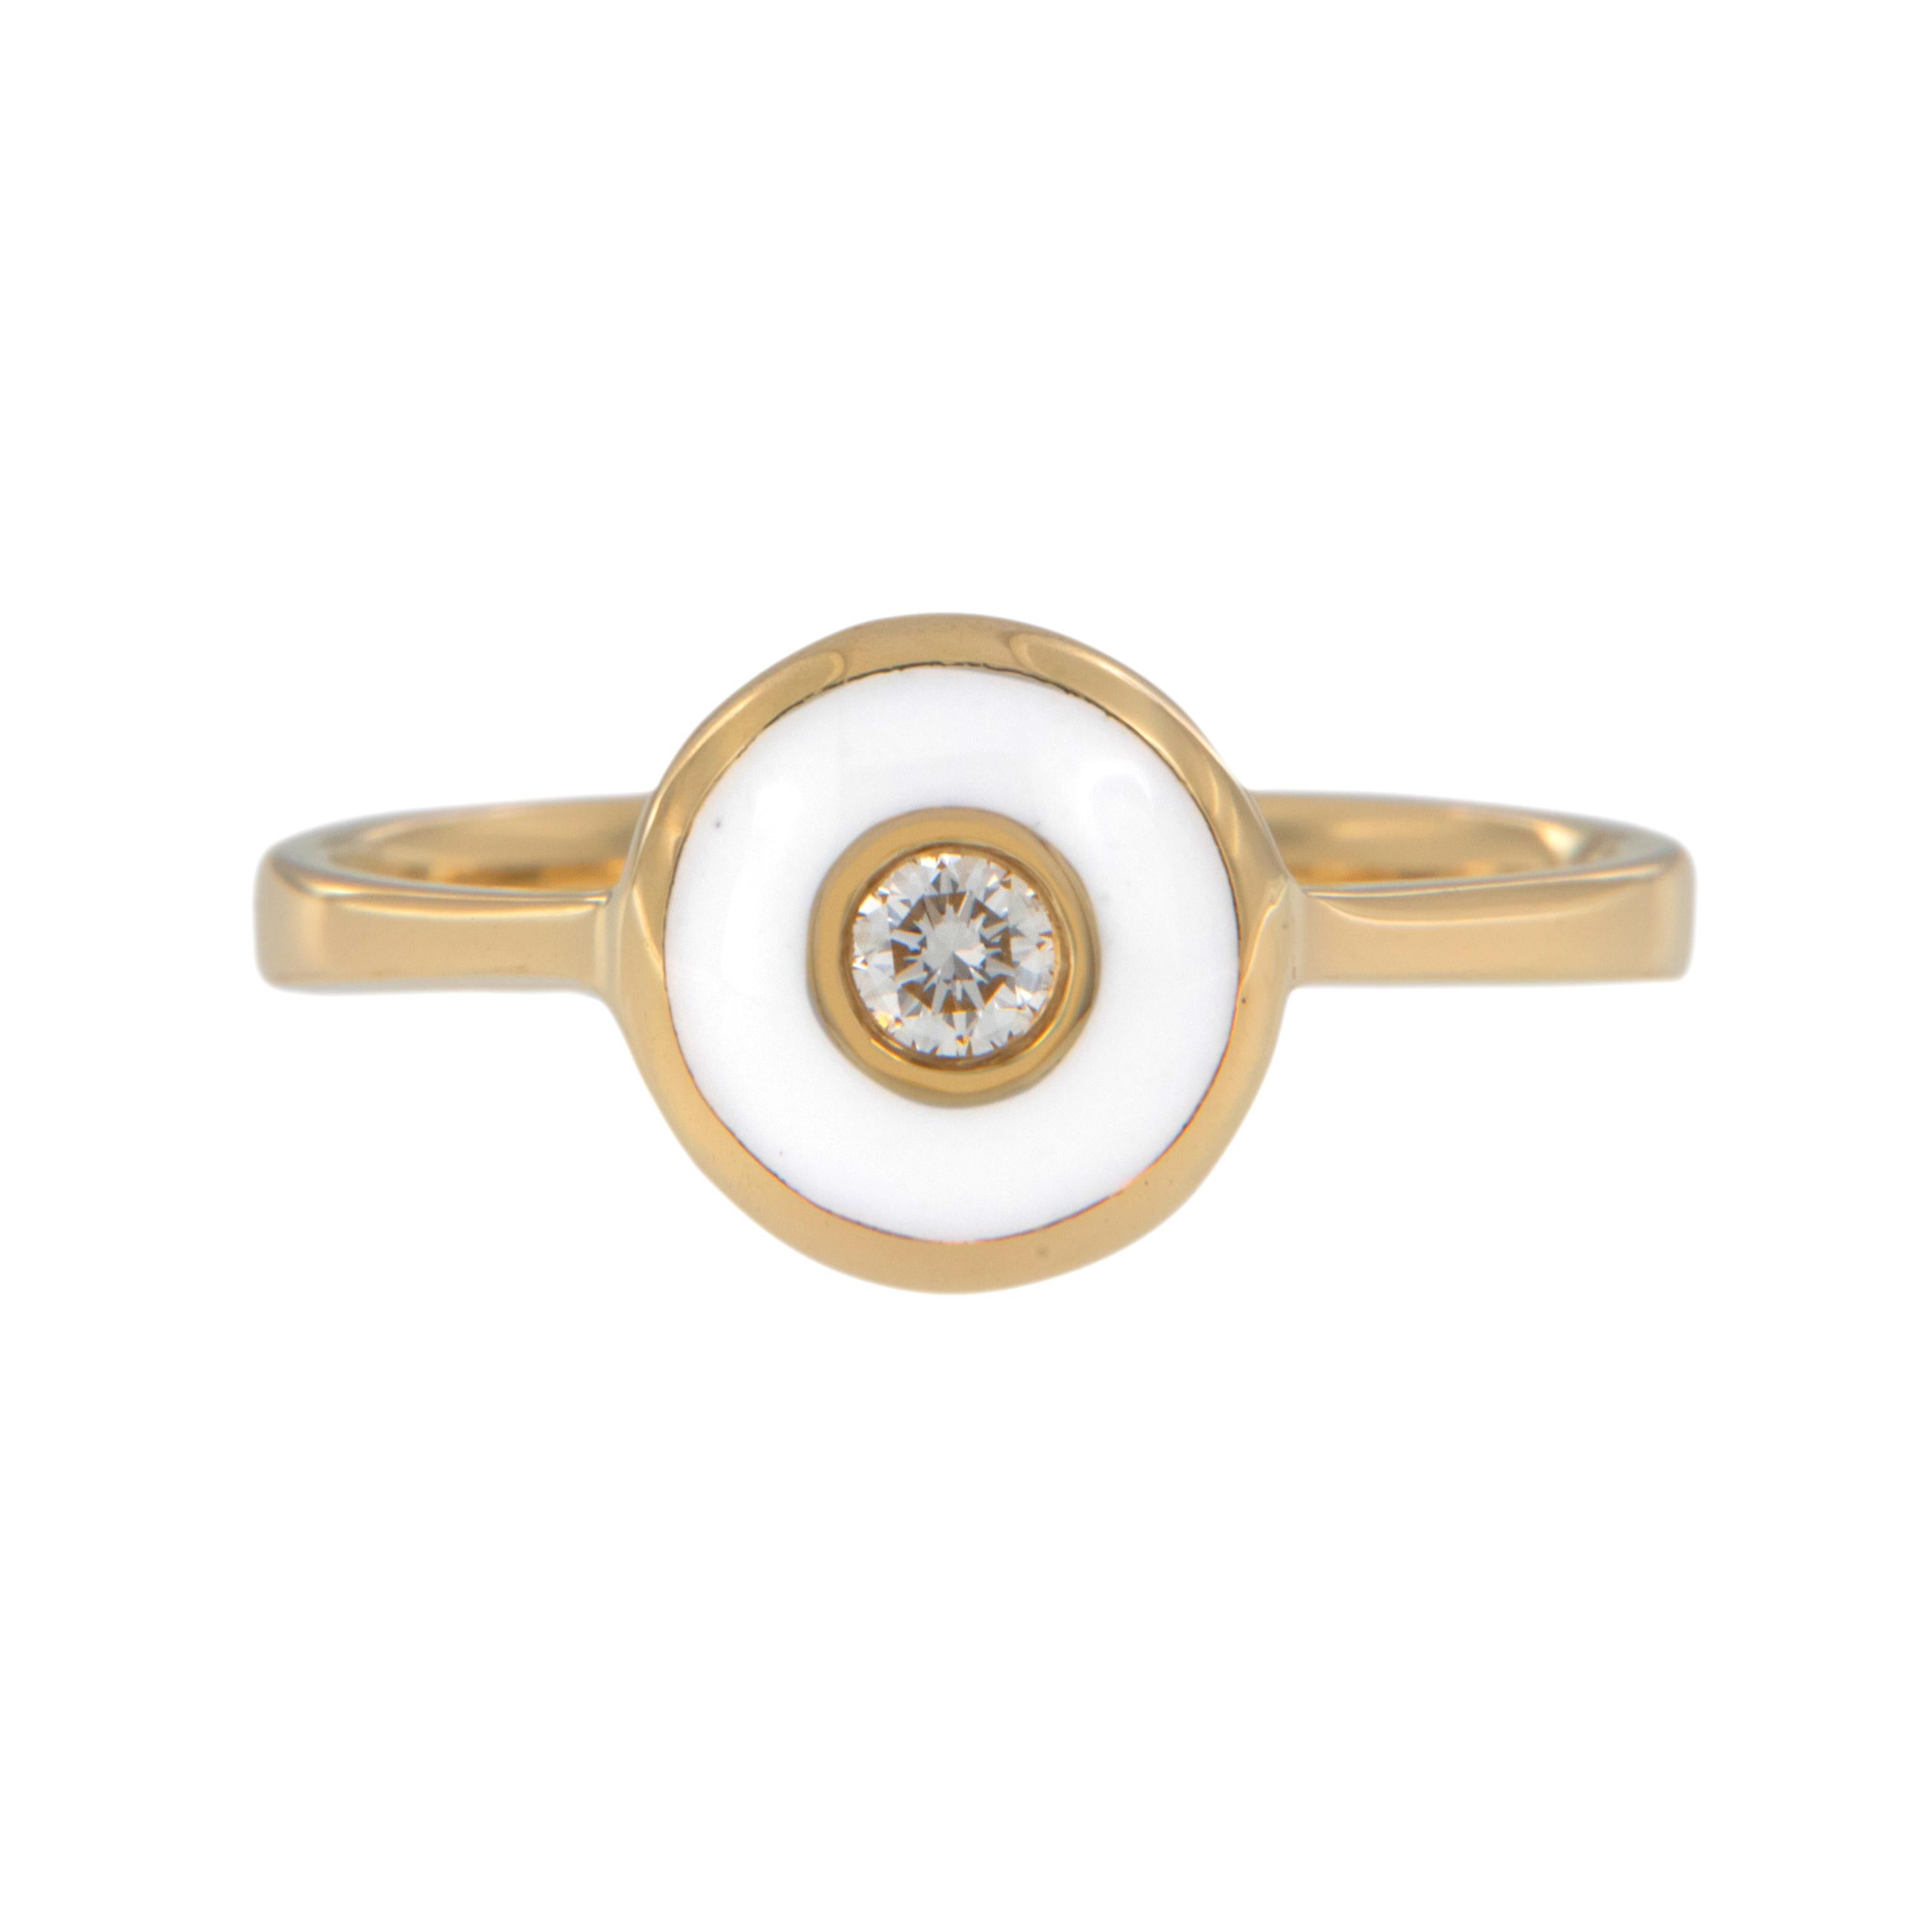 Simon G's  collections are inspired by an appreciation for the finer things in life. Limited Edition #681452. The evil eye is thought to keep you free from curses & protect you from negative energies. This lovely evil eye ring is made with a white